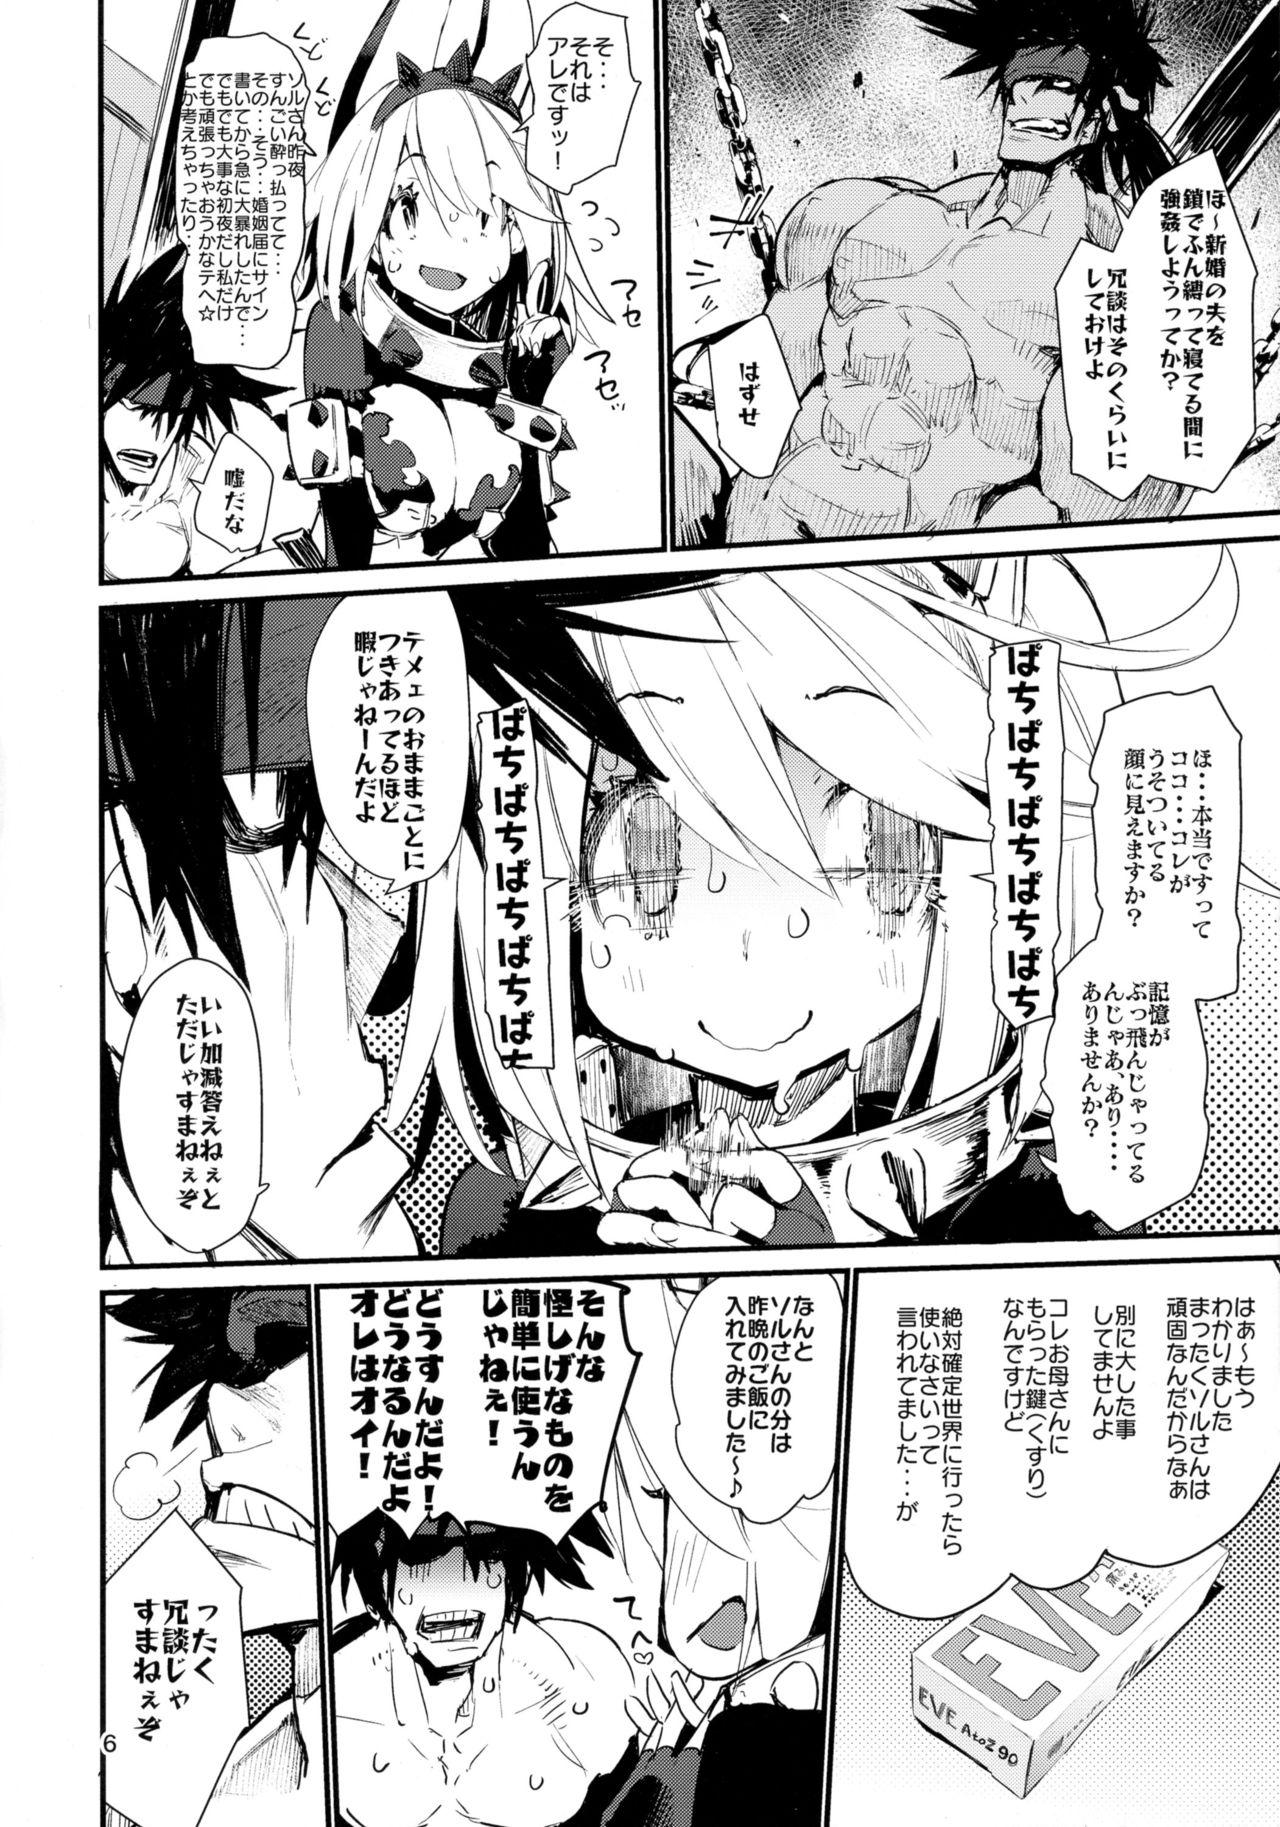 Lima Maximum Wedding. - Guilty gear Hot Couple Sex - Page 6